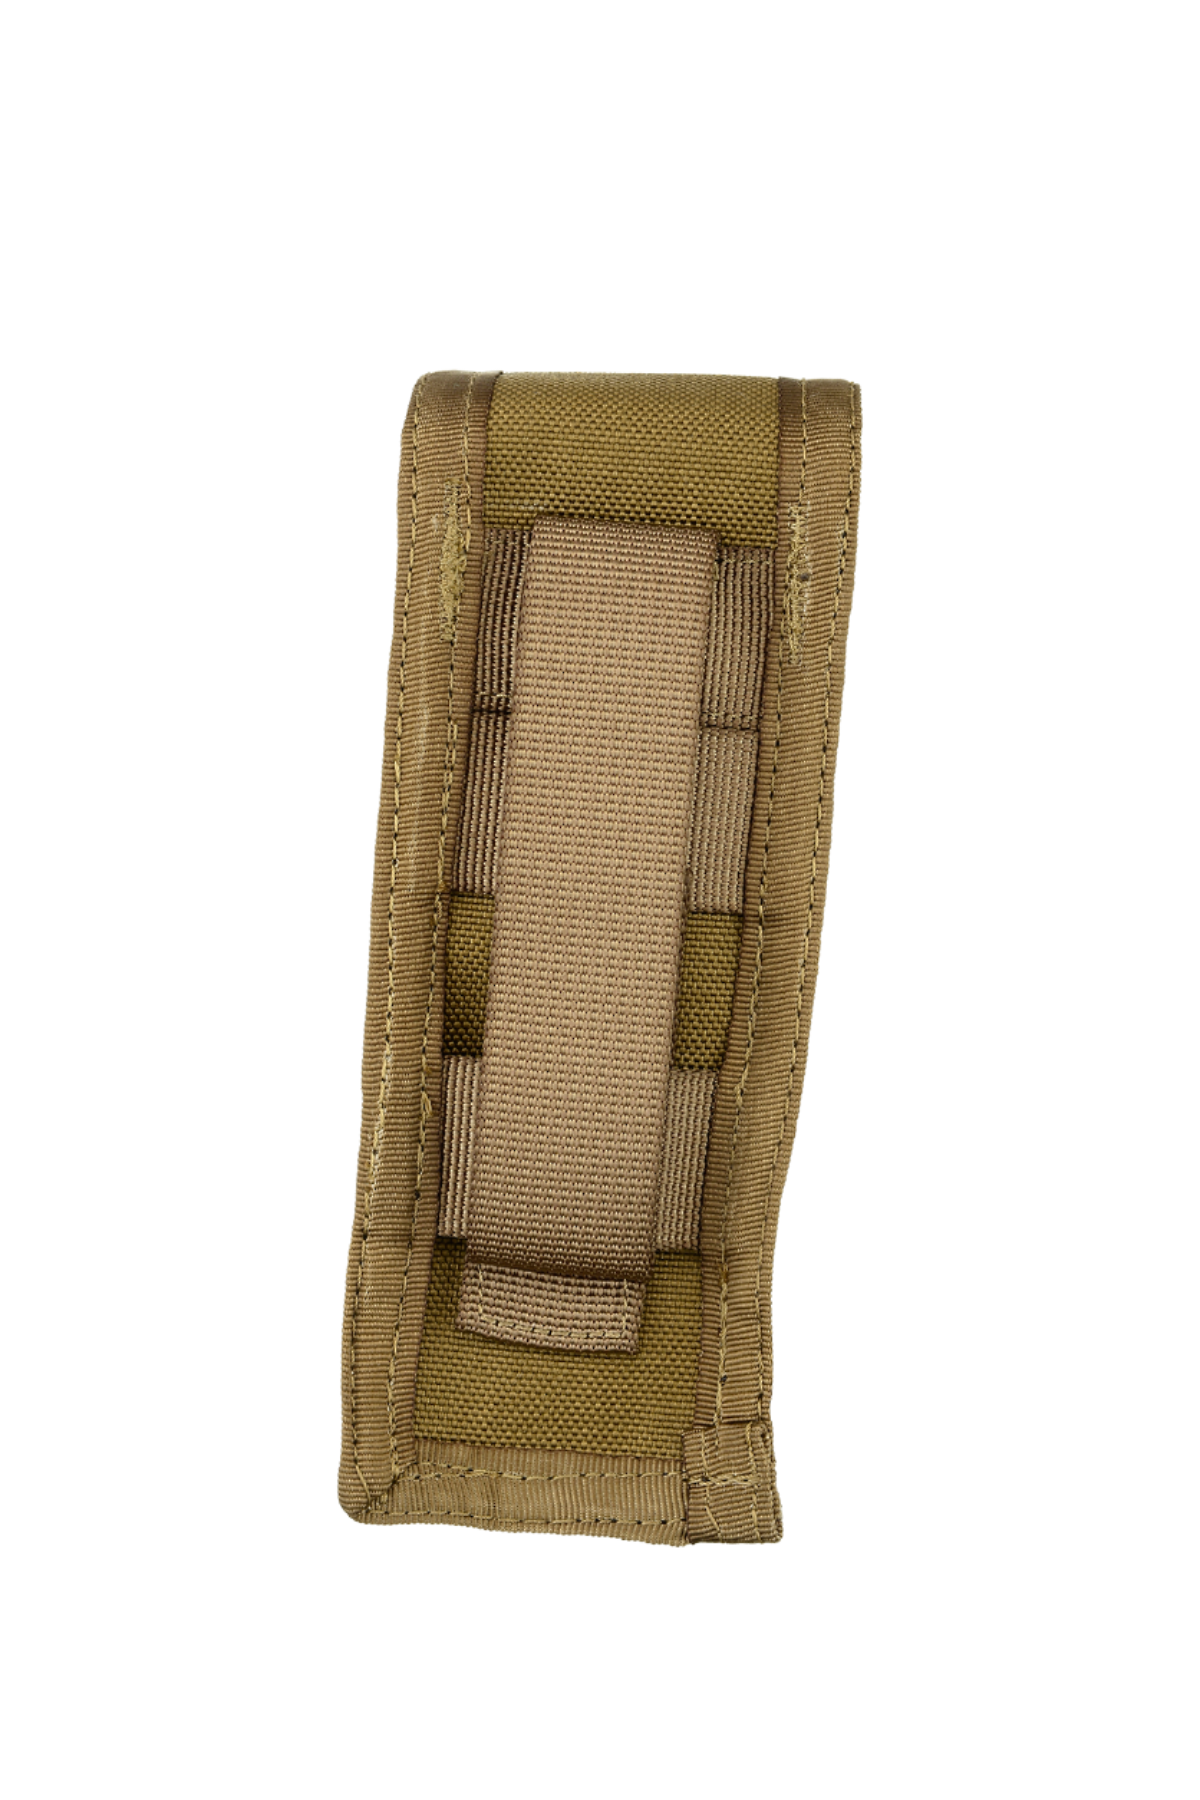 SHE-1037 FLASHLIGHT POUCH-CT